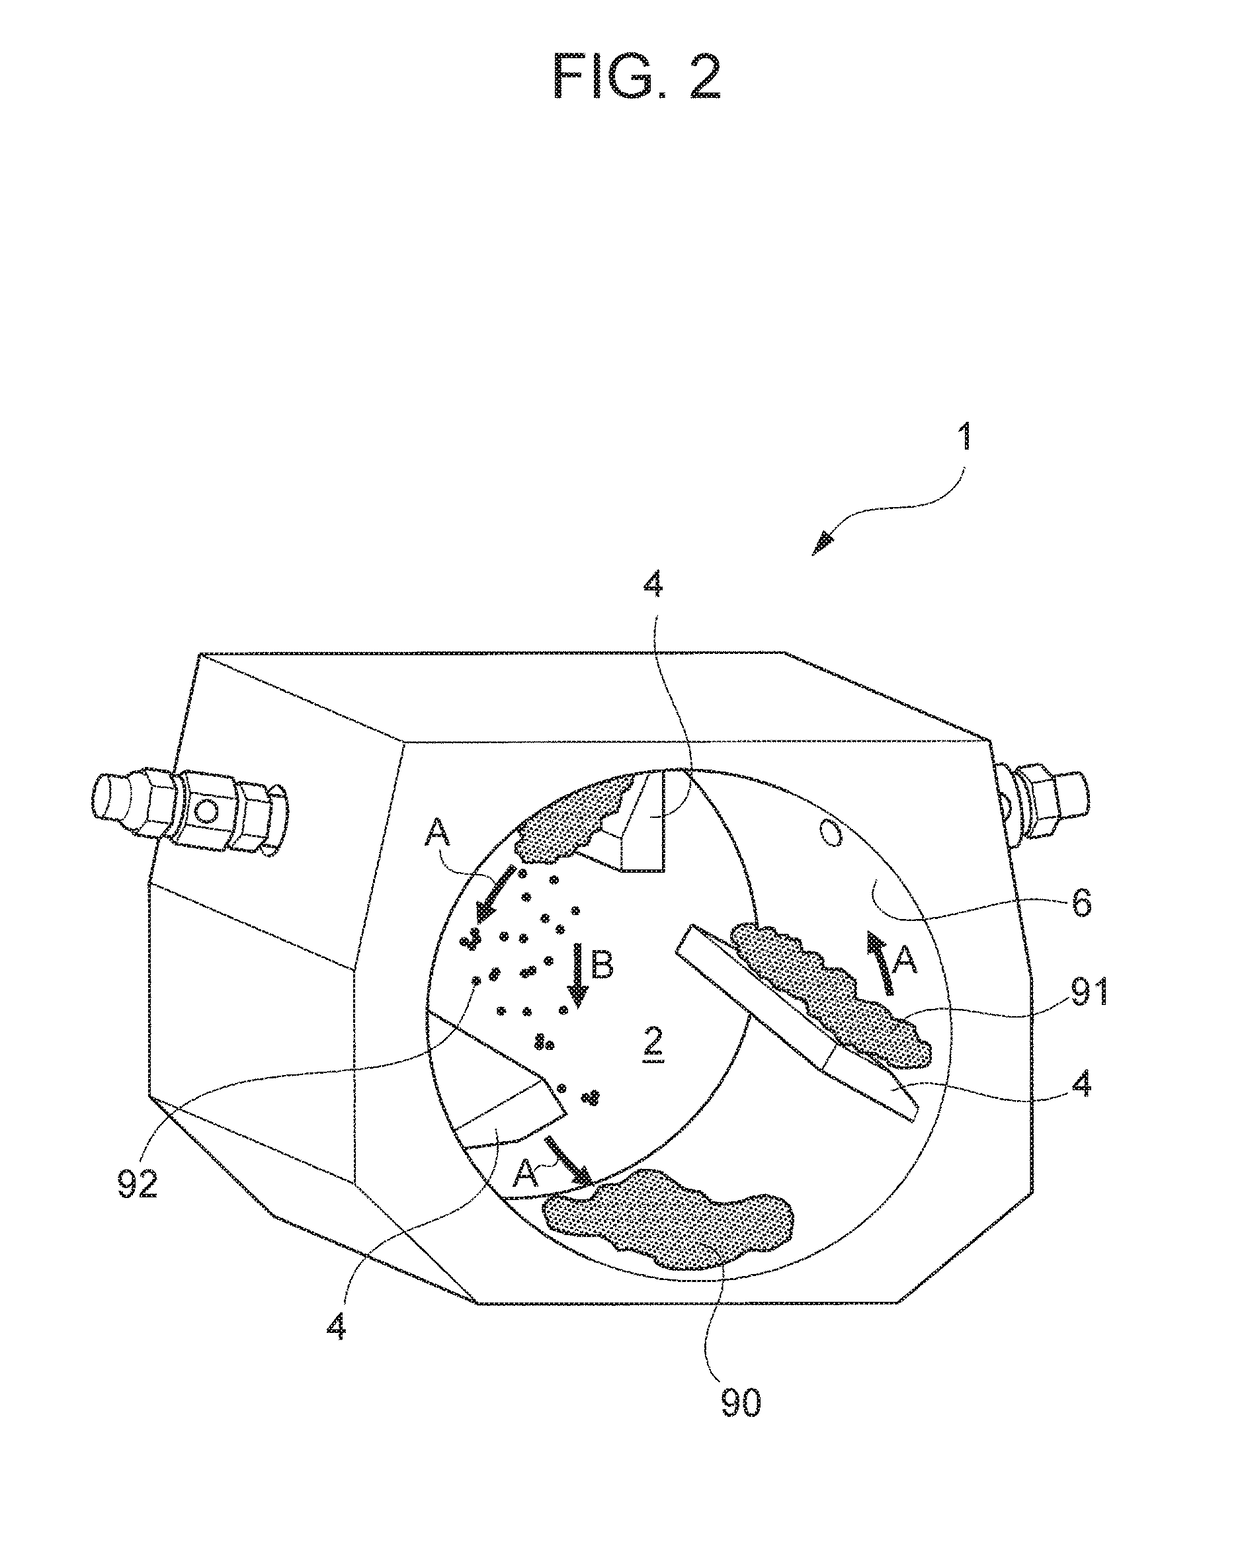 Granulated body manufacturing apparatus and method